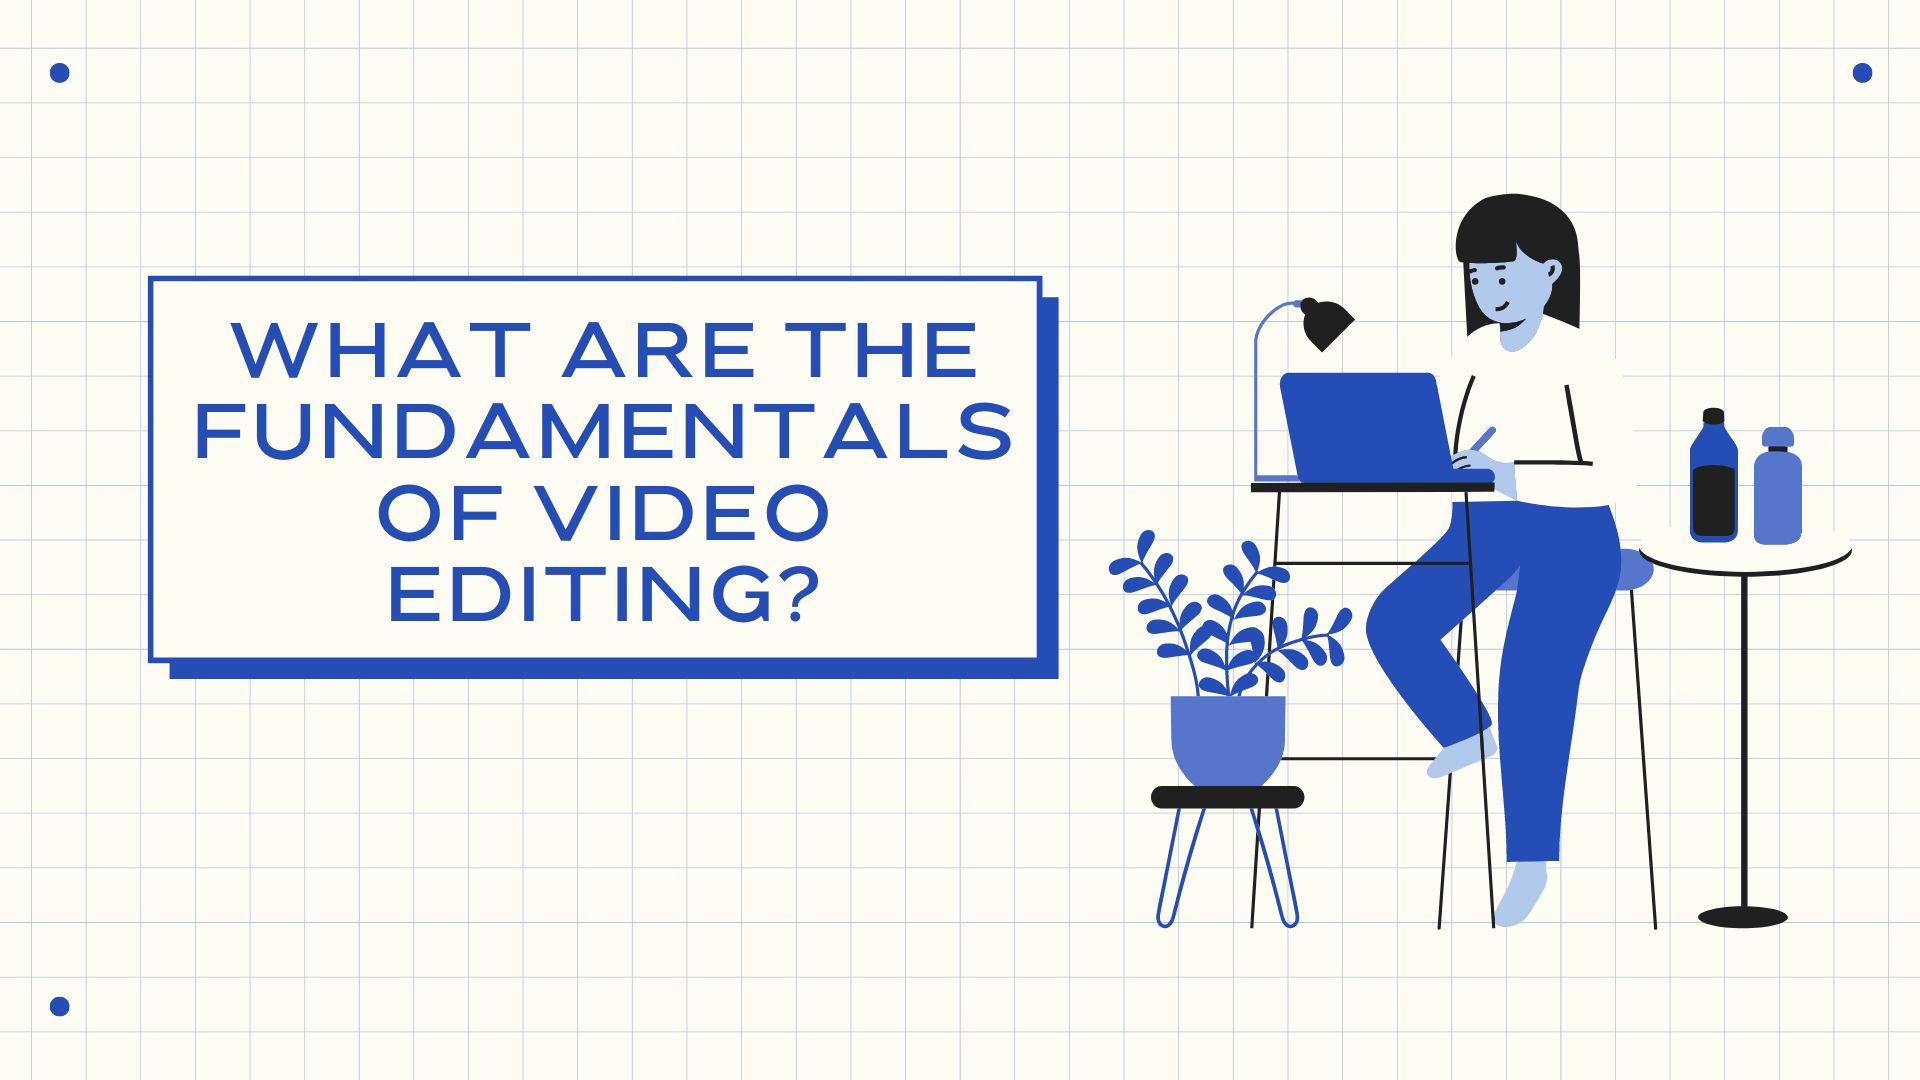 What are the fundamentals of Video Editing?